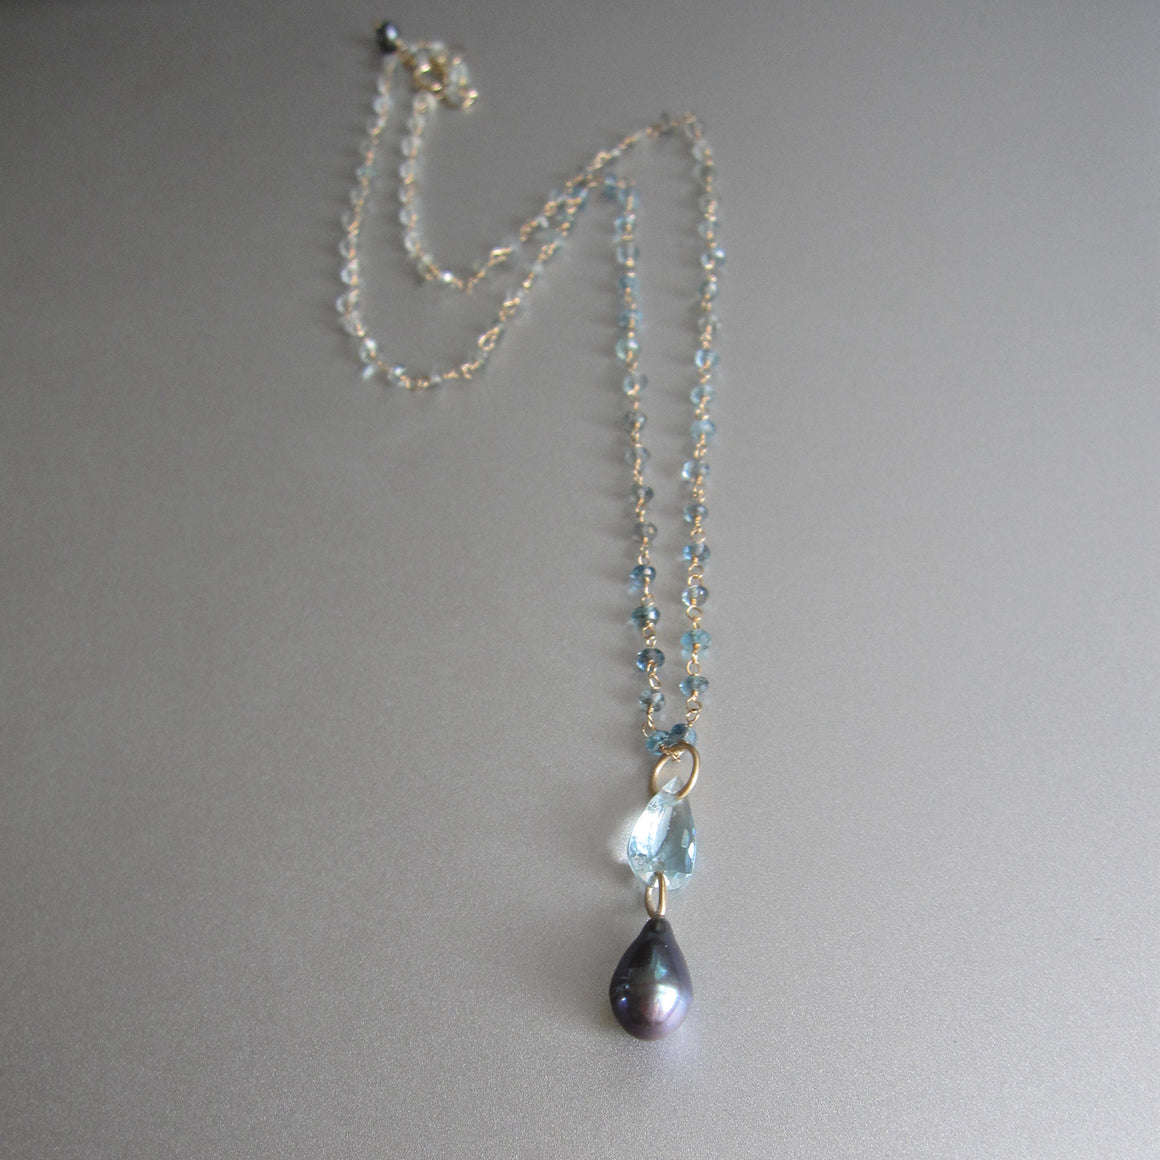 Aquamarine and Gray Pearl Double Drop Pendant, Solid 14k Gold Beaded Chain Drop Necklace